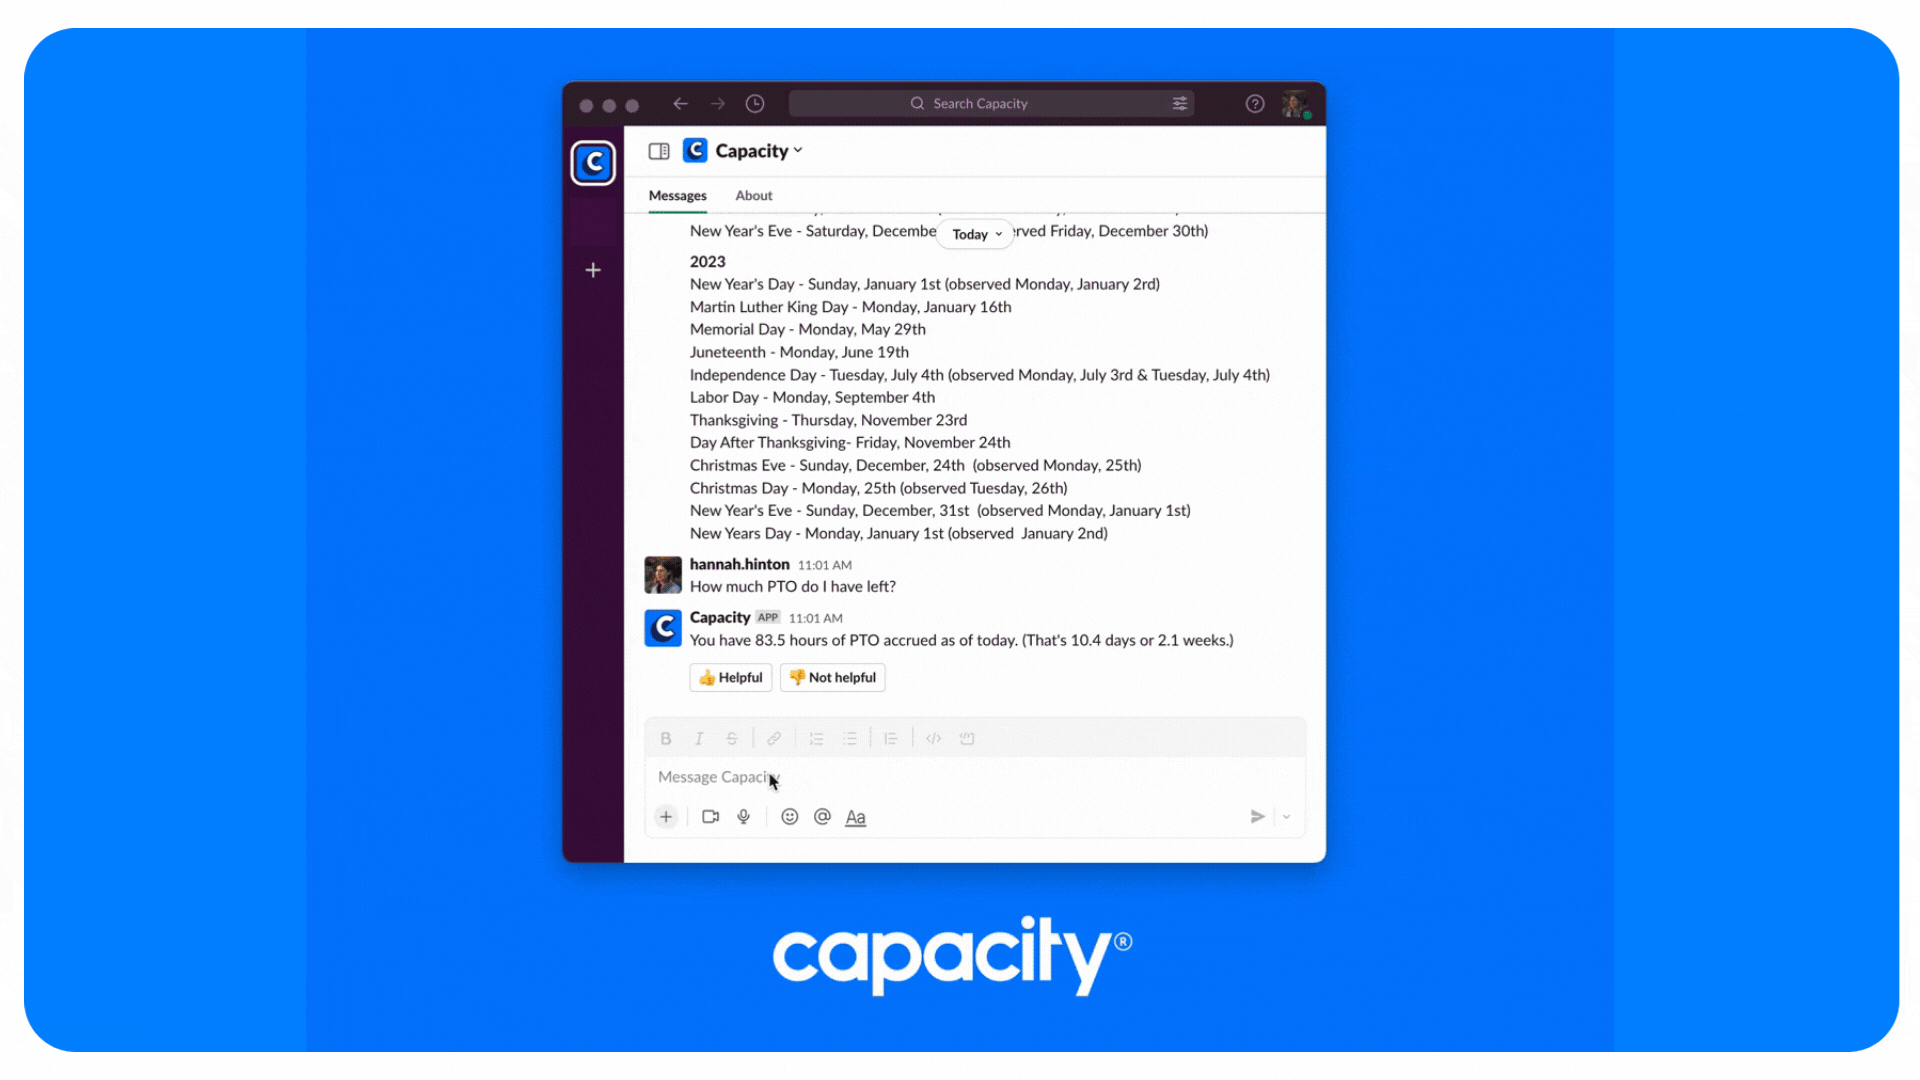 Gif showing task automation in action with Capacity on Slack. User asks Capacity for the company org chart.  